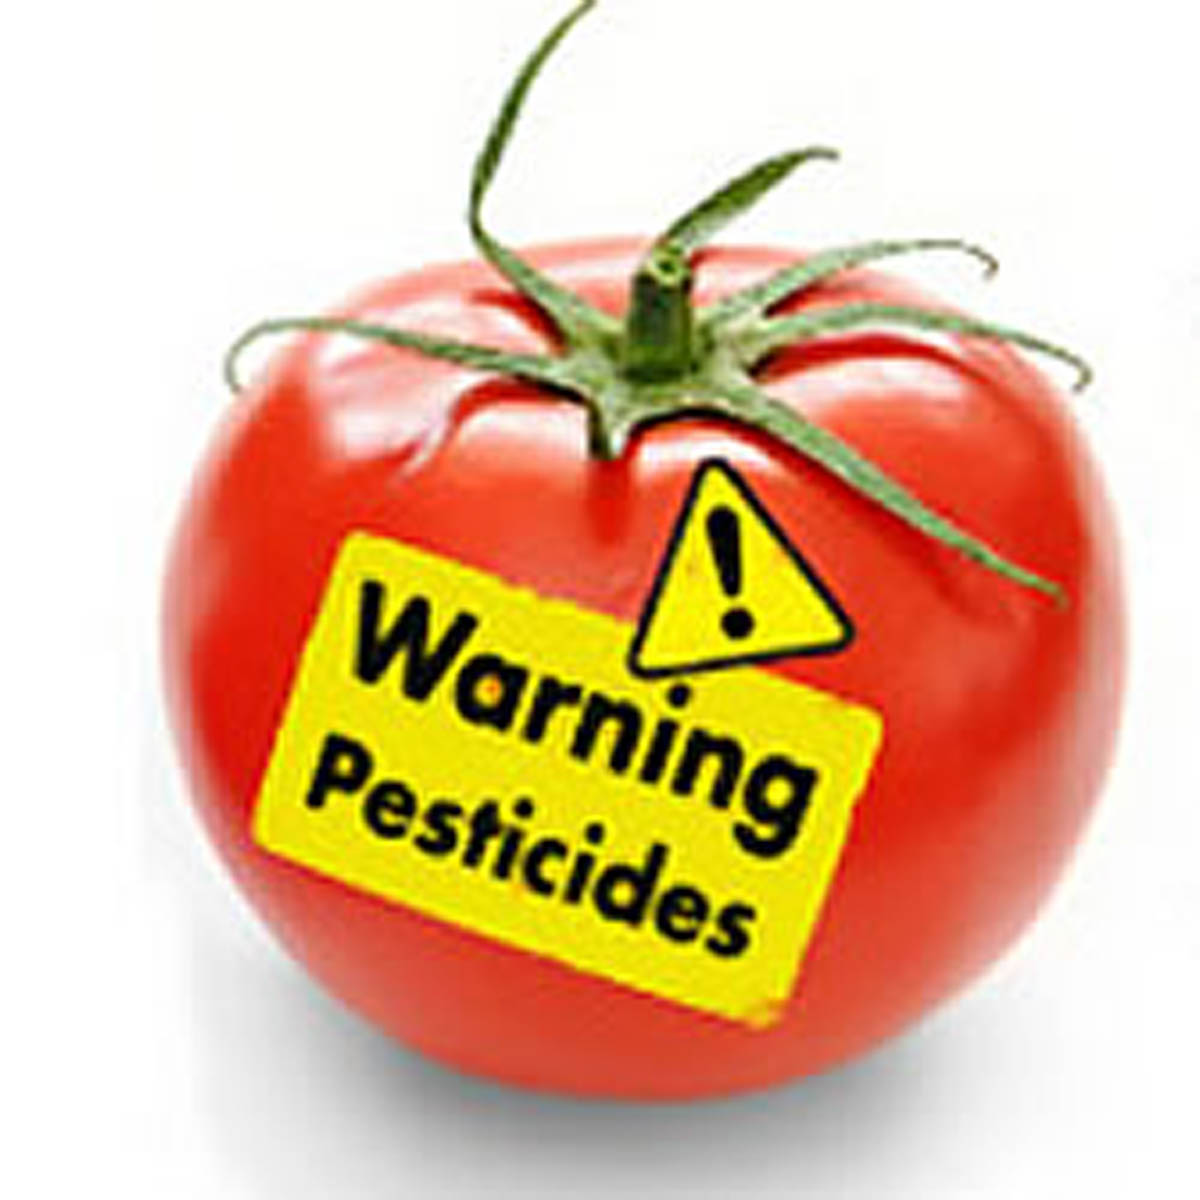 What The Mayans Knew About Pesticides